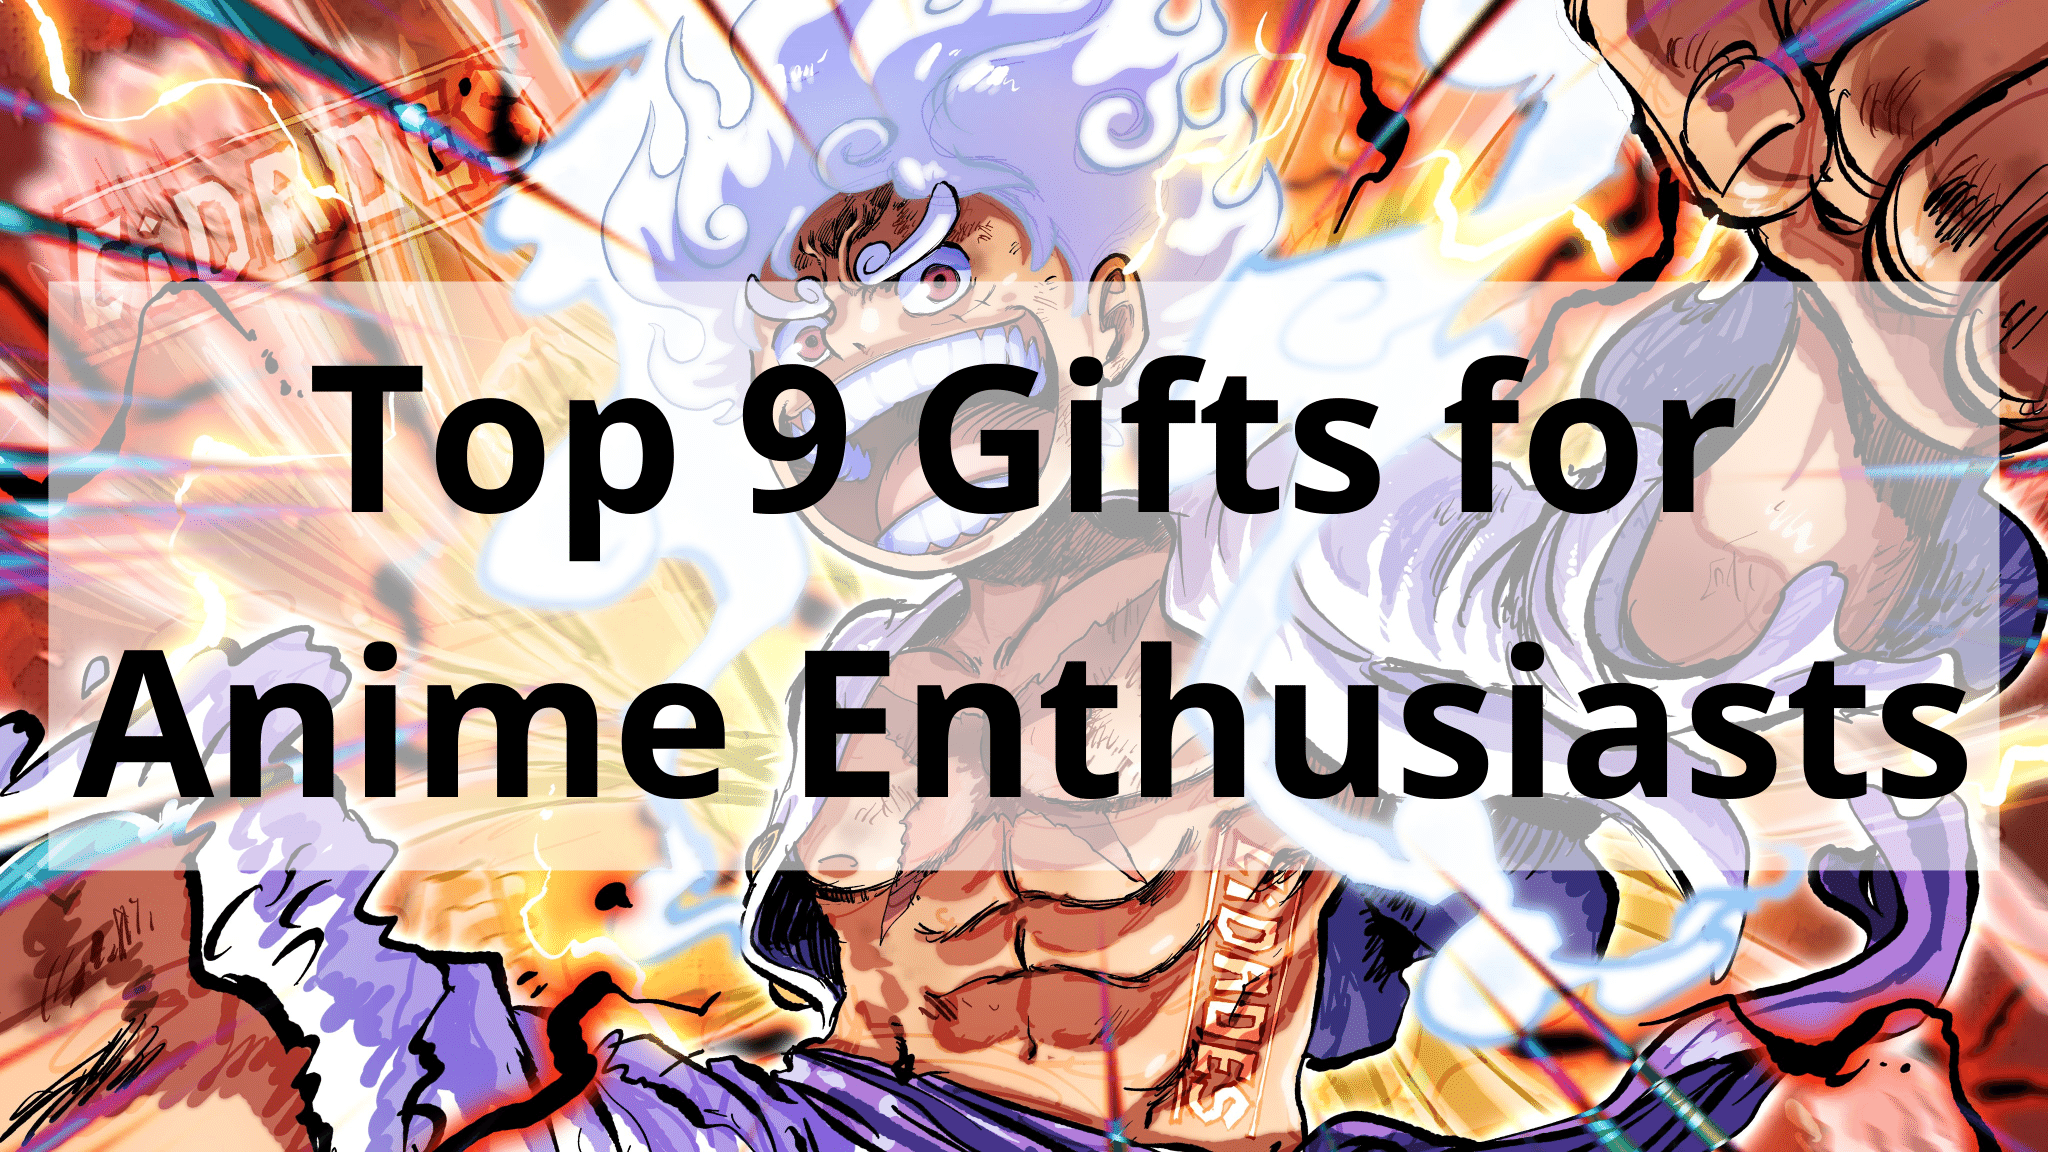 Top 9 Gifts for Anime Enthusiasts